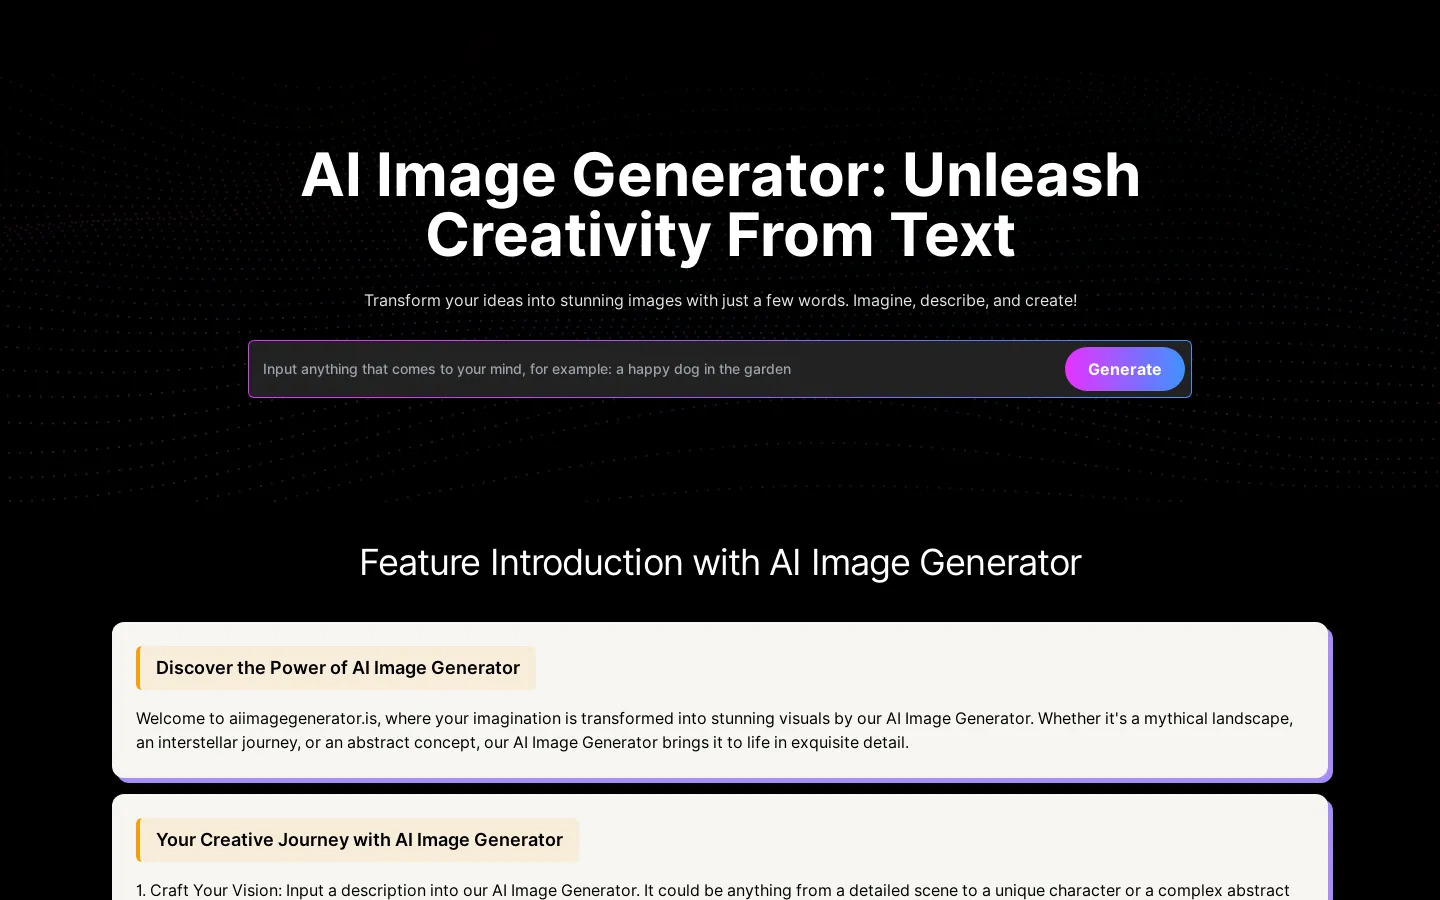 Free AI Image Generator From text